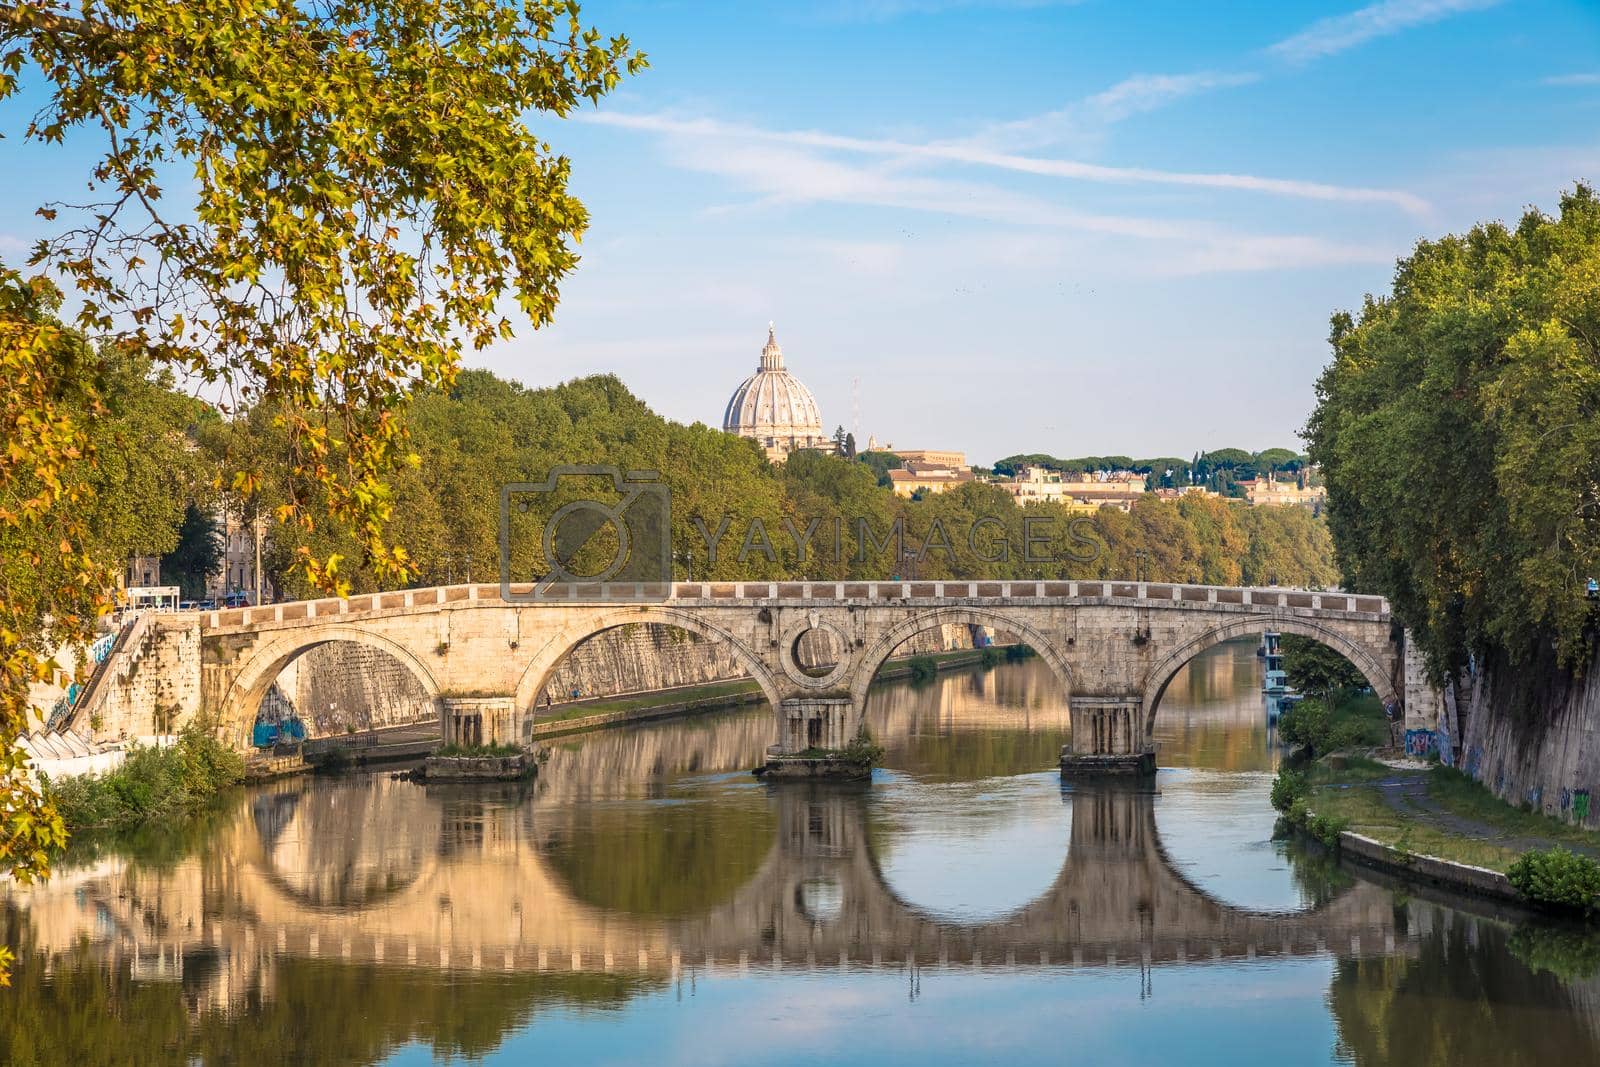 Royalty free image of Bridge on Tiber river in Rome, Italy. Vatican Basilica cupola in background with sunrise light. by Perseomedusa